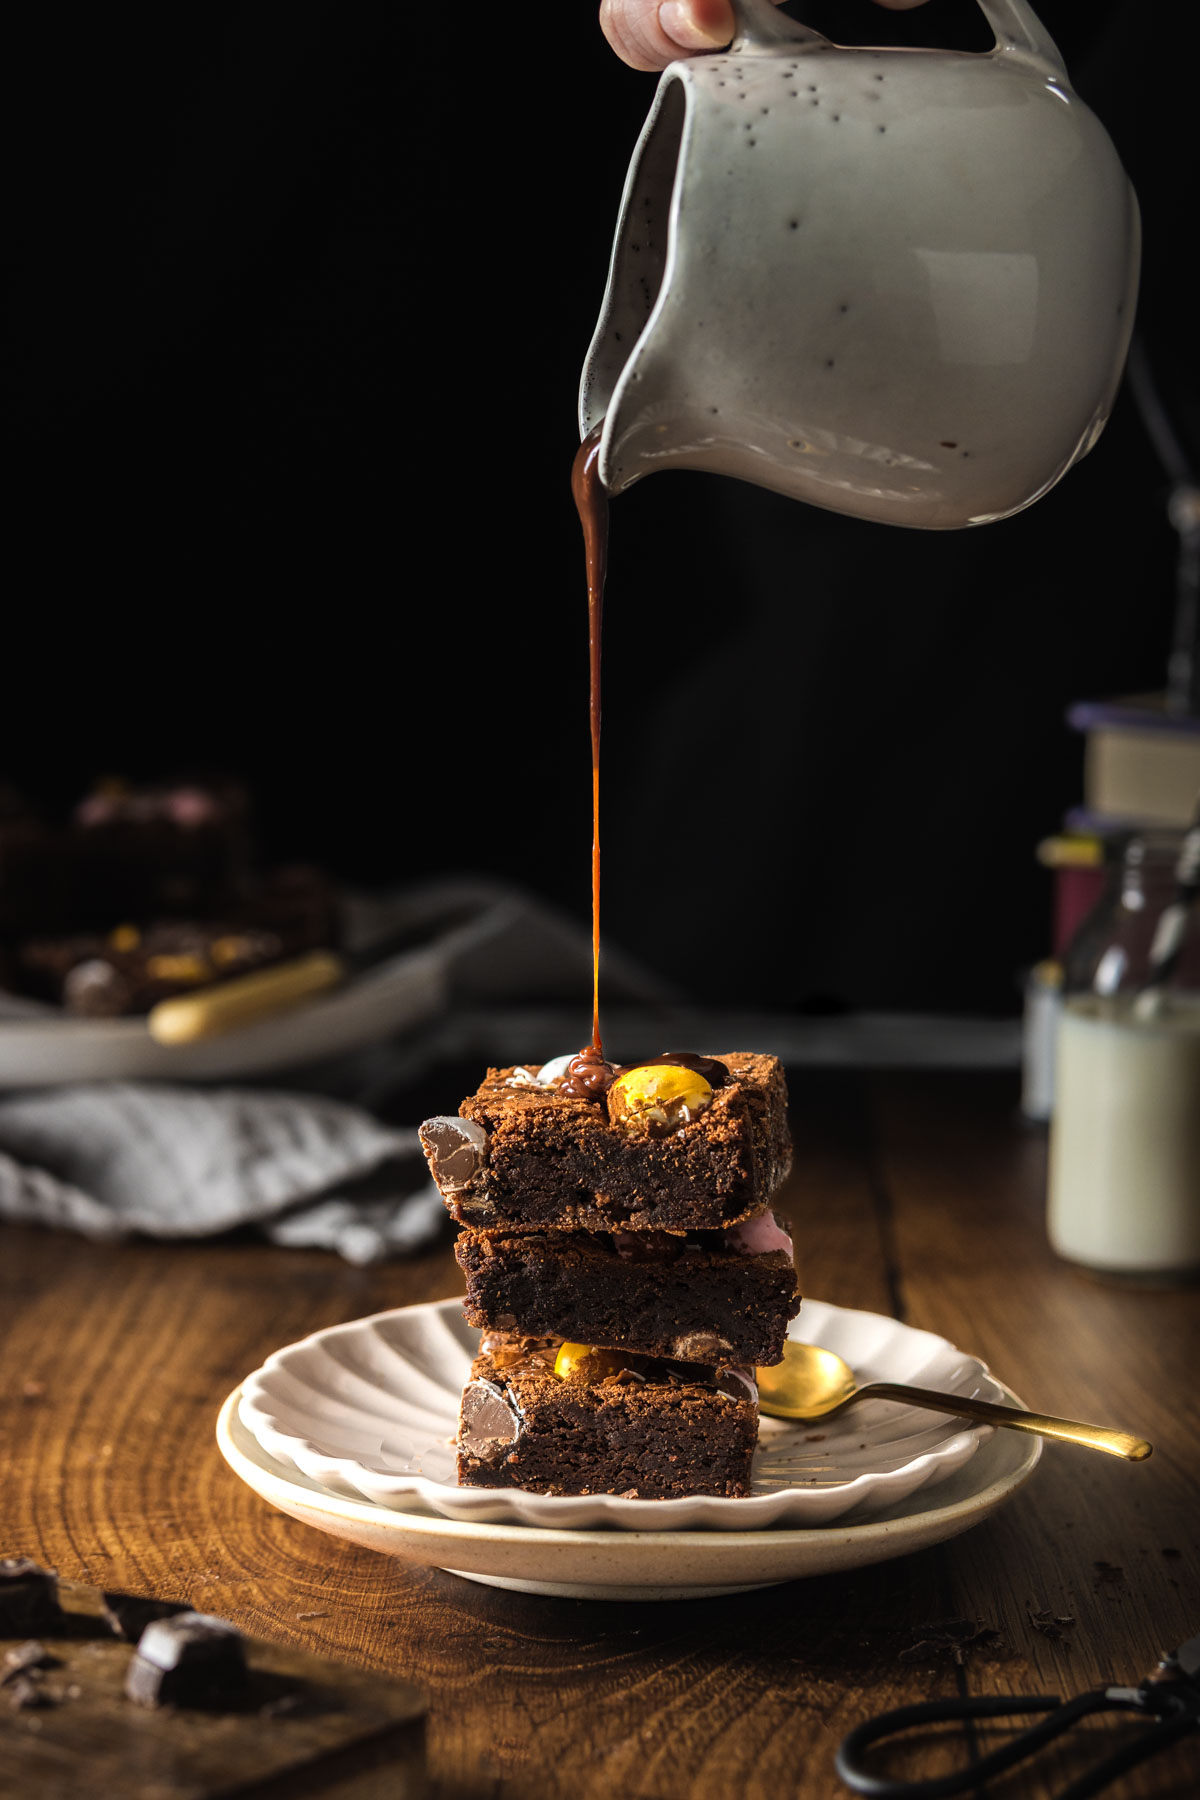 Jug of chocolate sauce being poured over a stack of three chocolate brownies filled with Mini Eggs